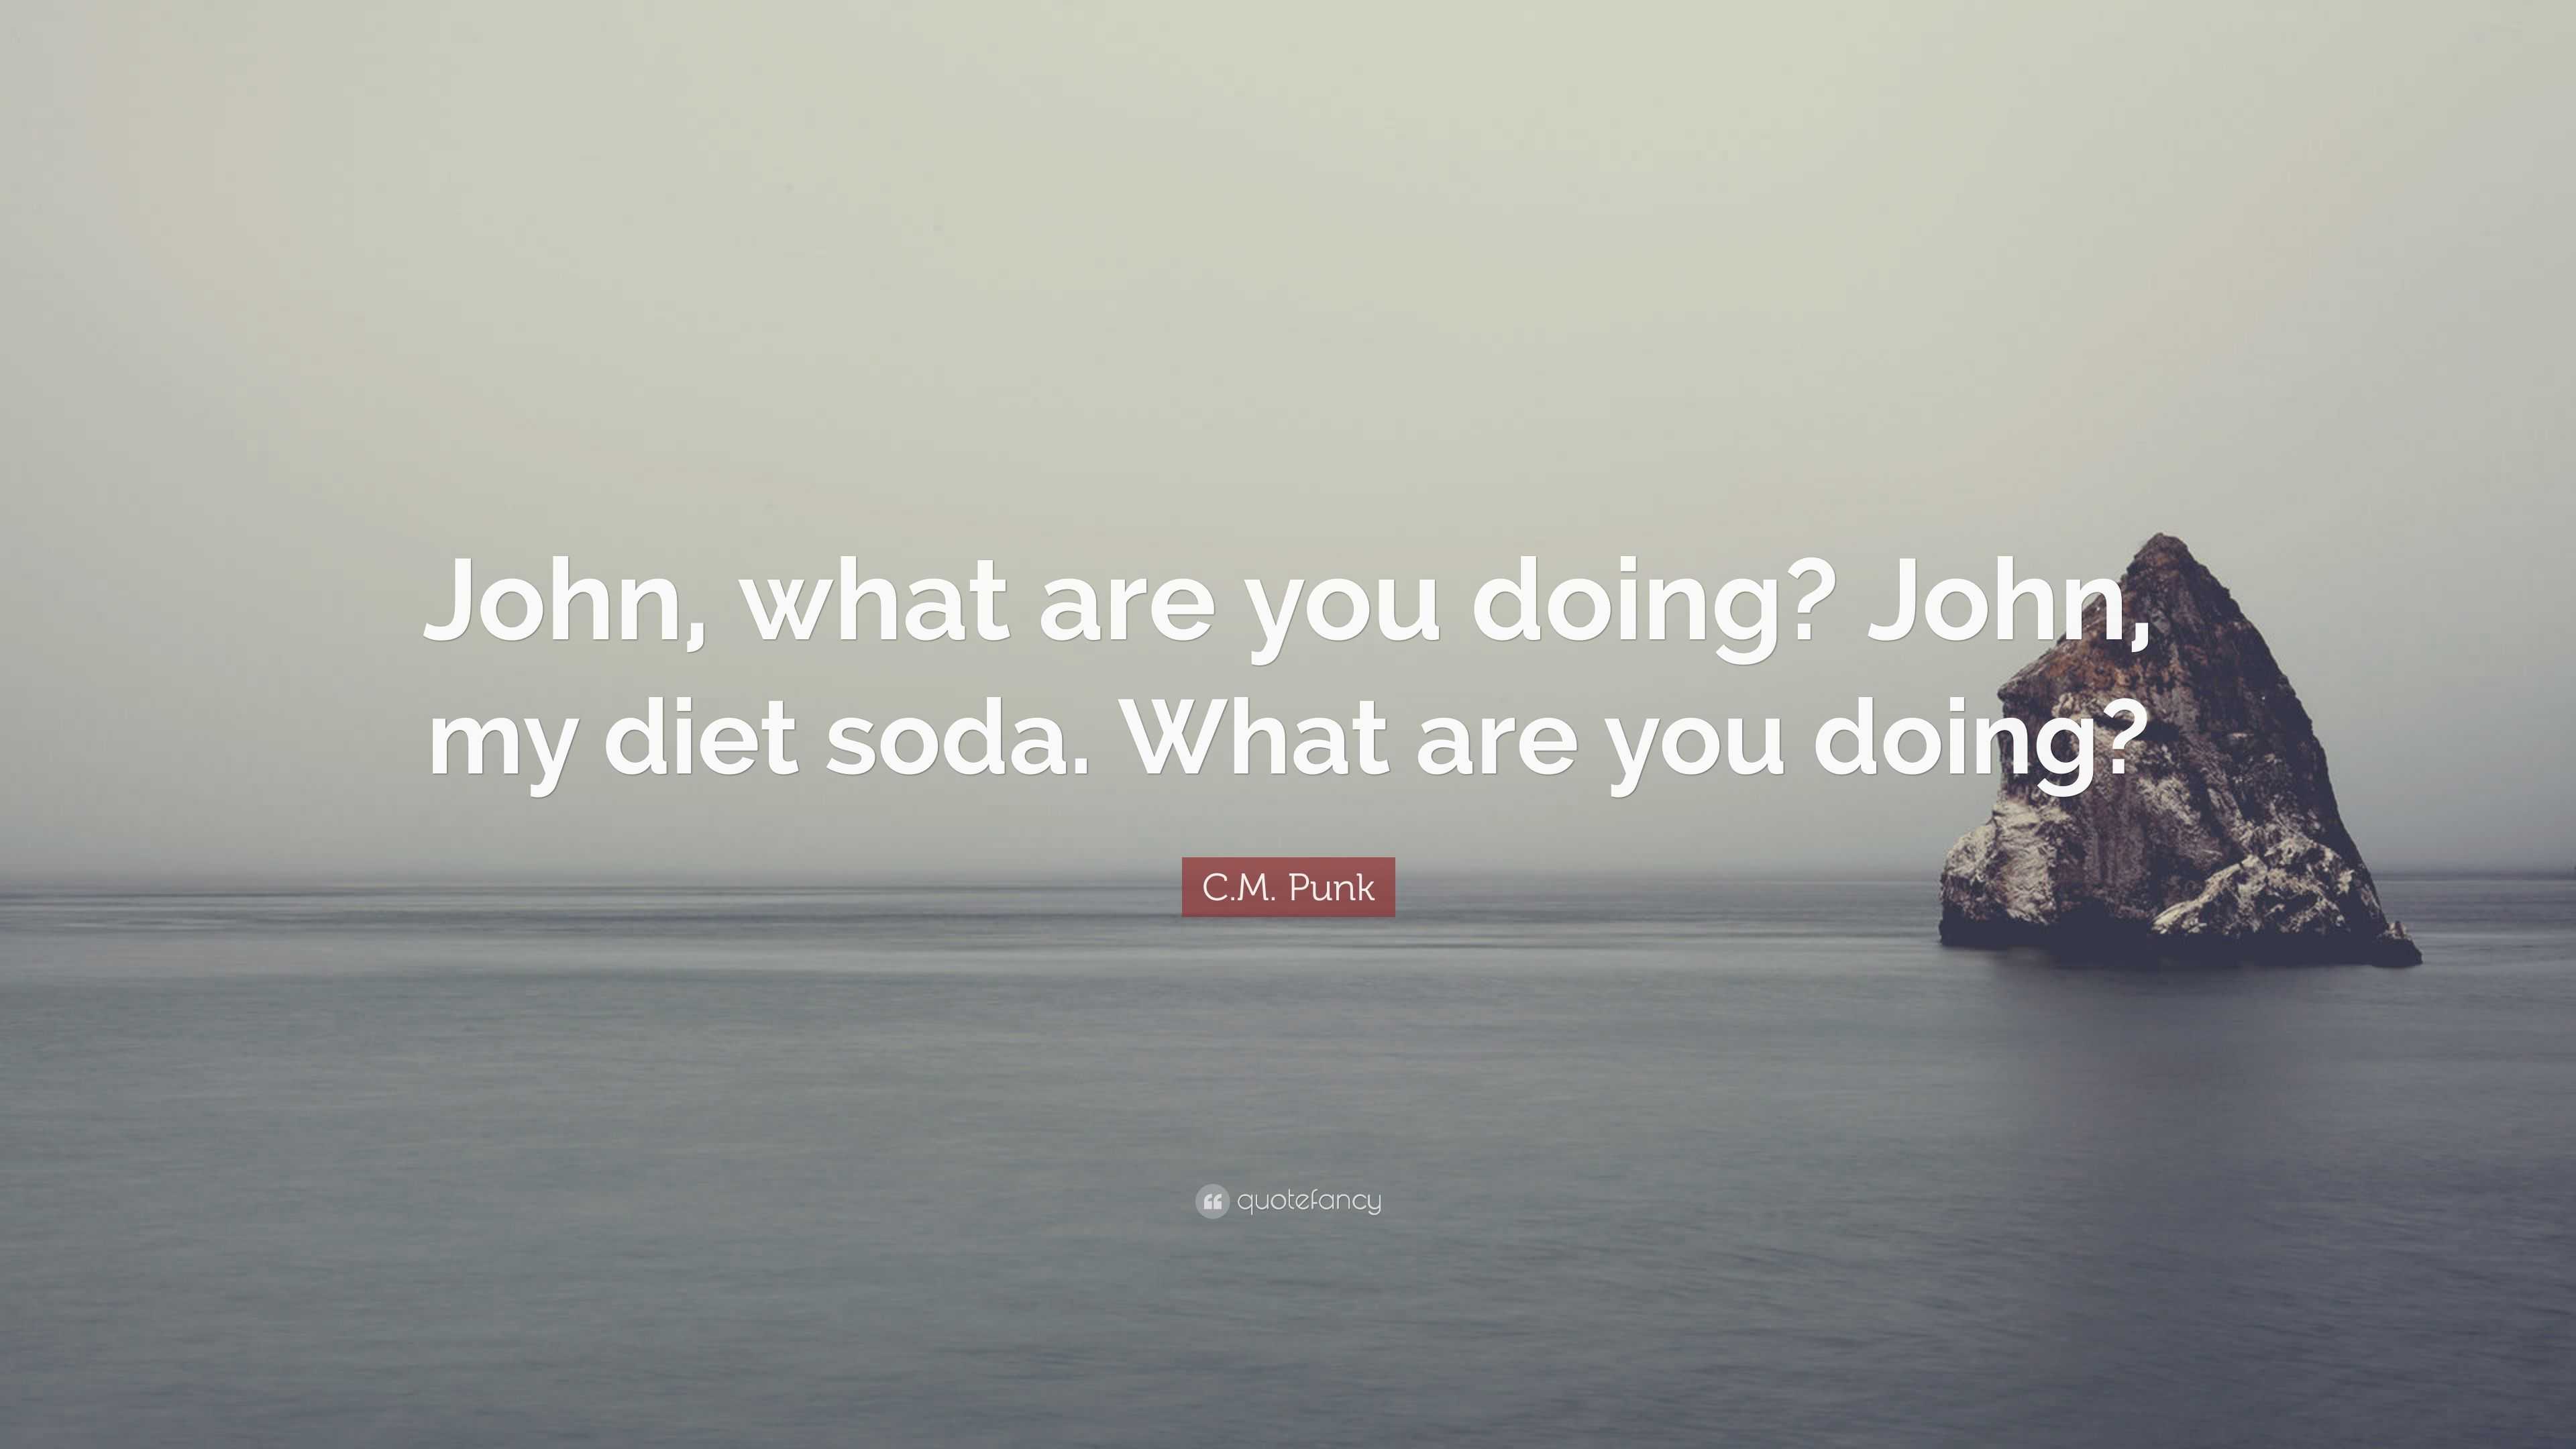 4419186-C-M-Punk-Quote-John-what-are-you-doing-John-my-diet-soda-What-are.jpg